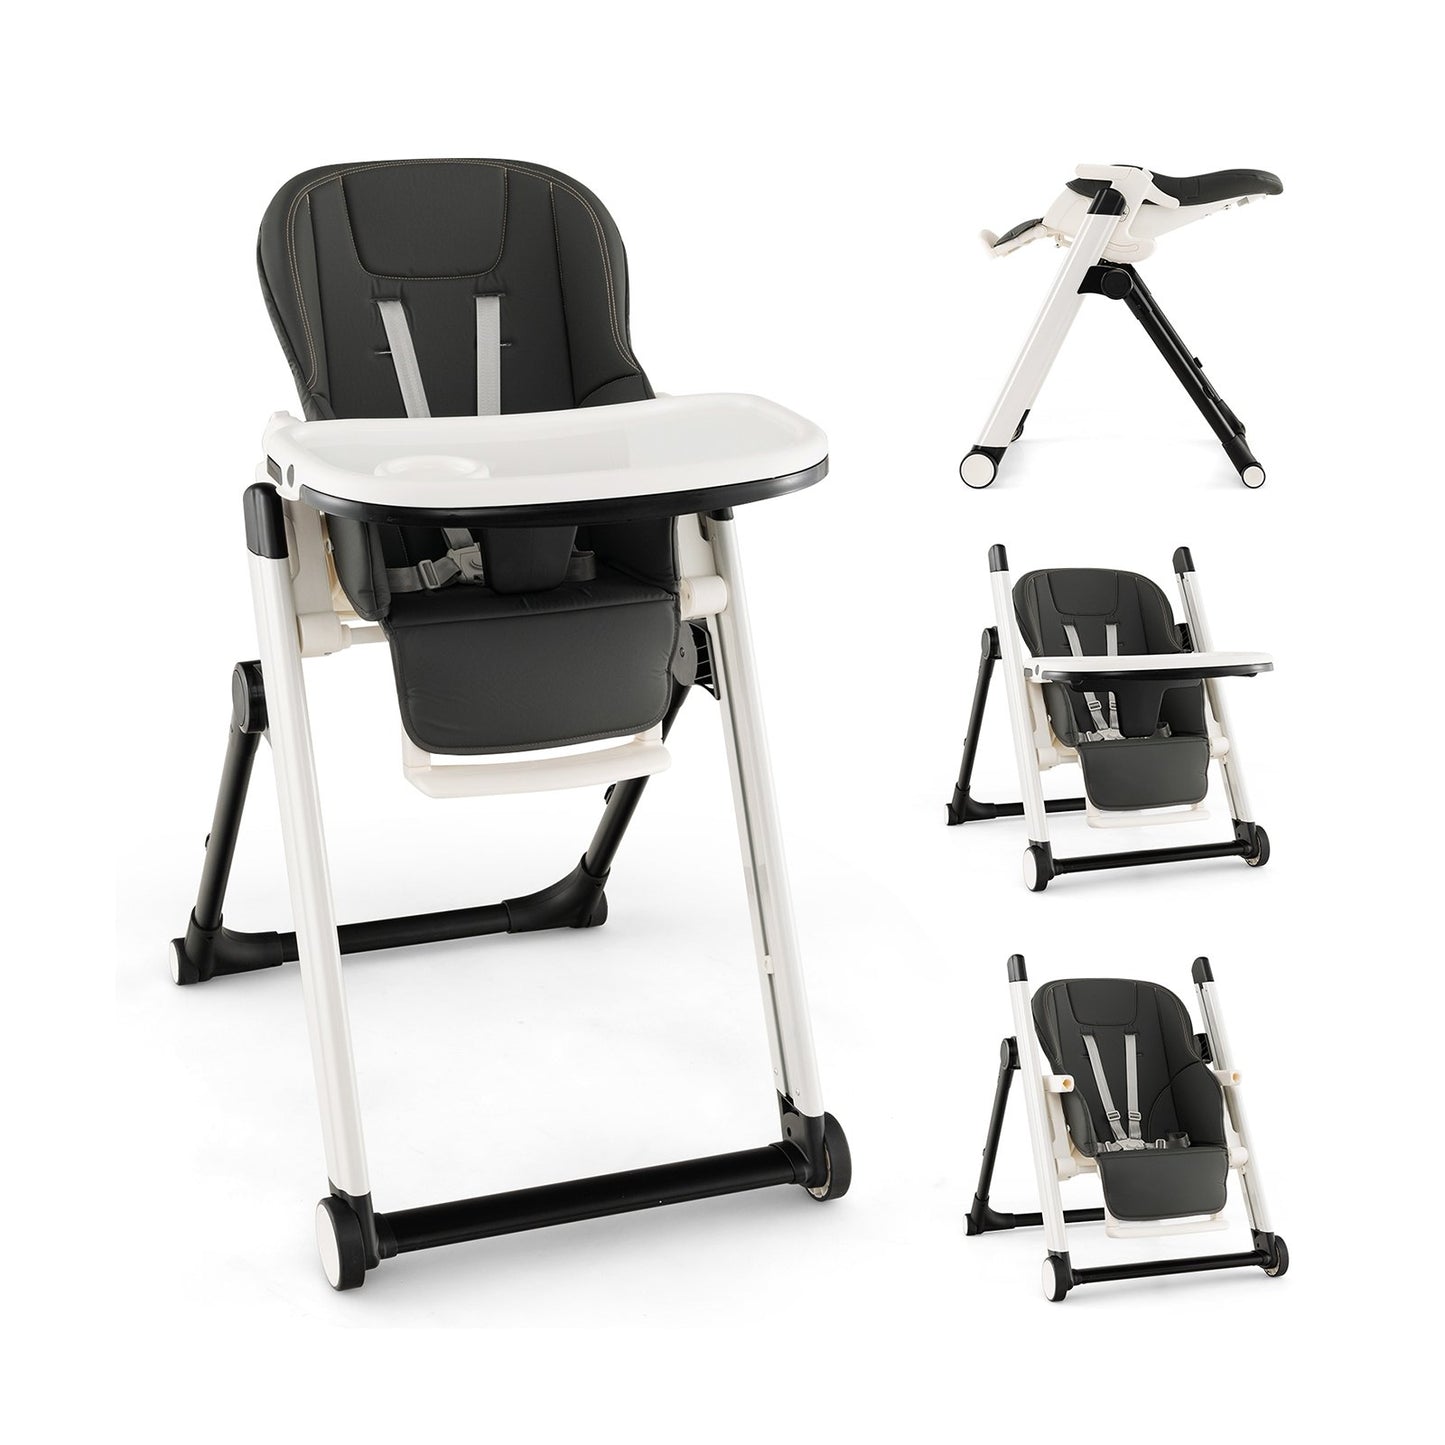 Foldable Feeding Sleep Playing High Chair with Recline Backrest for Babies and Toddlers, Dark Gray